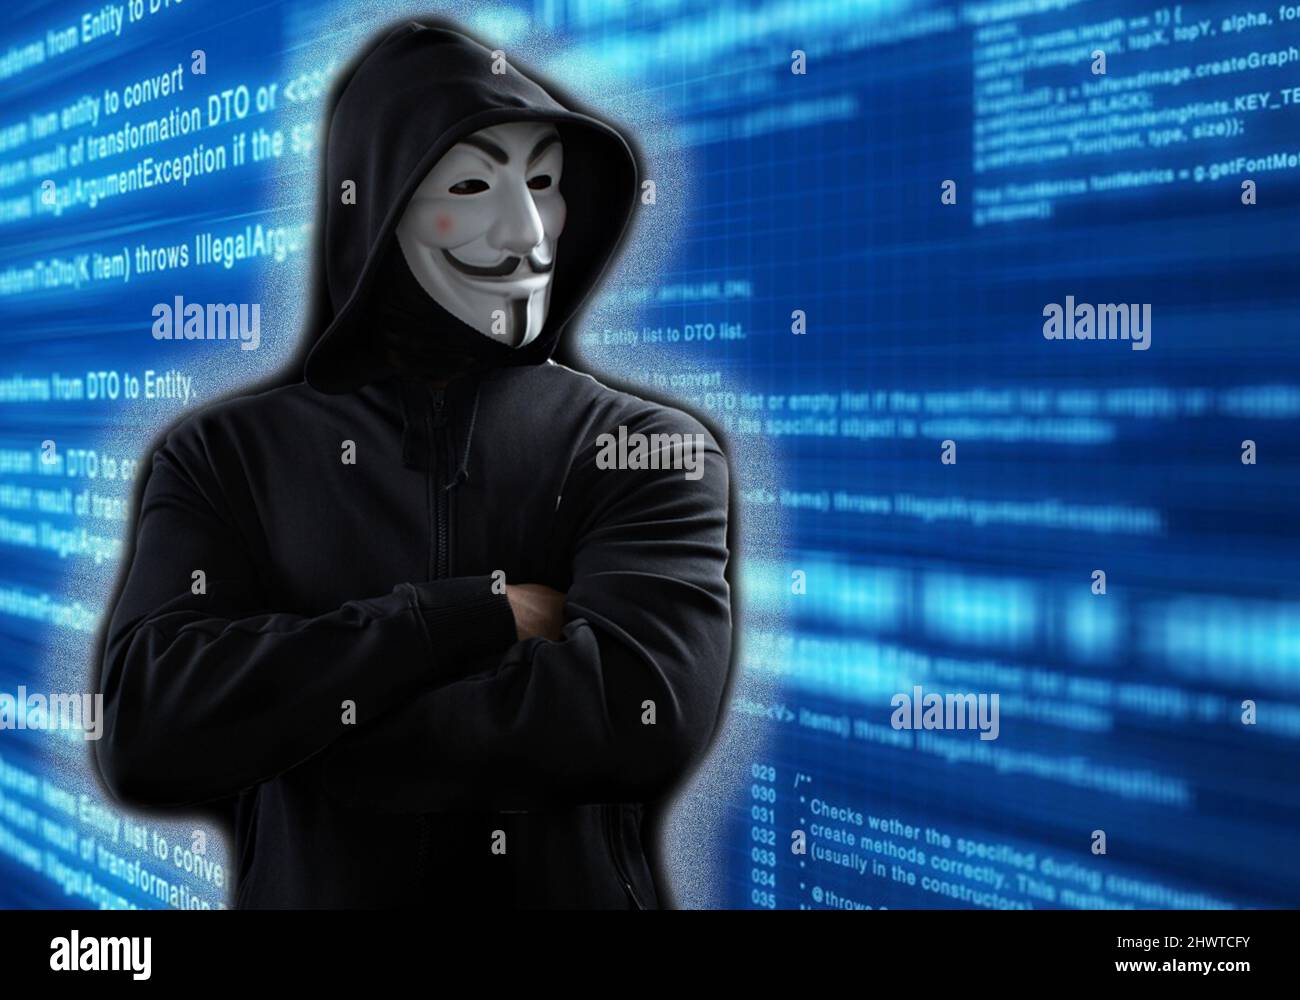 image representing anonymous, cyber attack threat, hacker attack Stock Photo